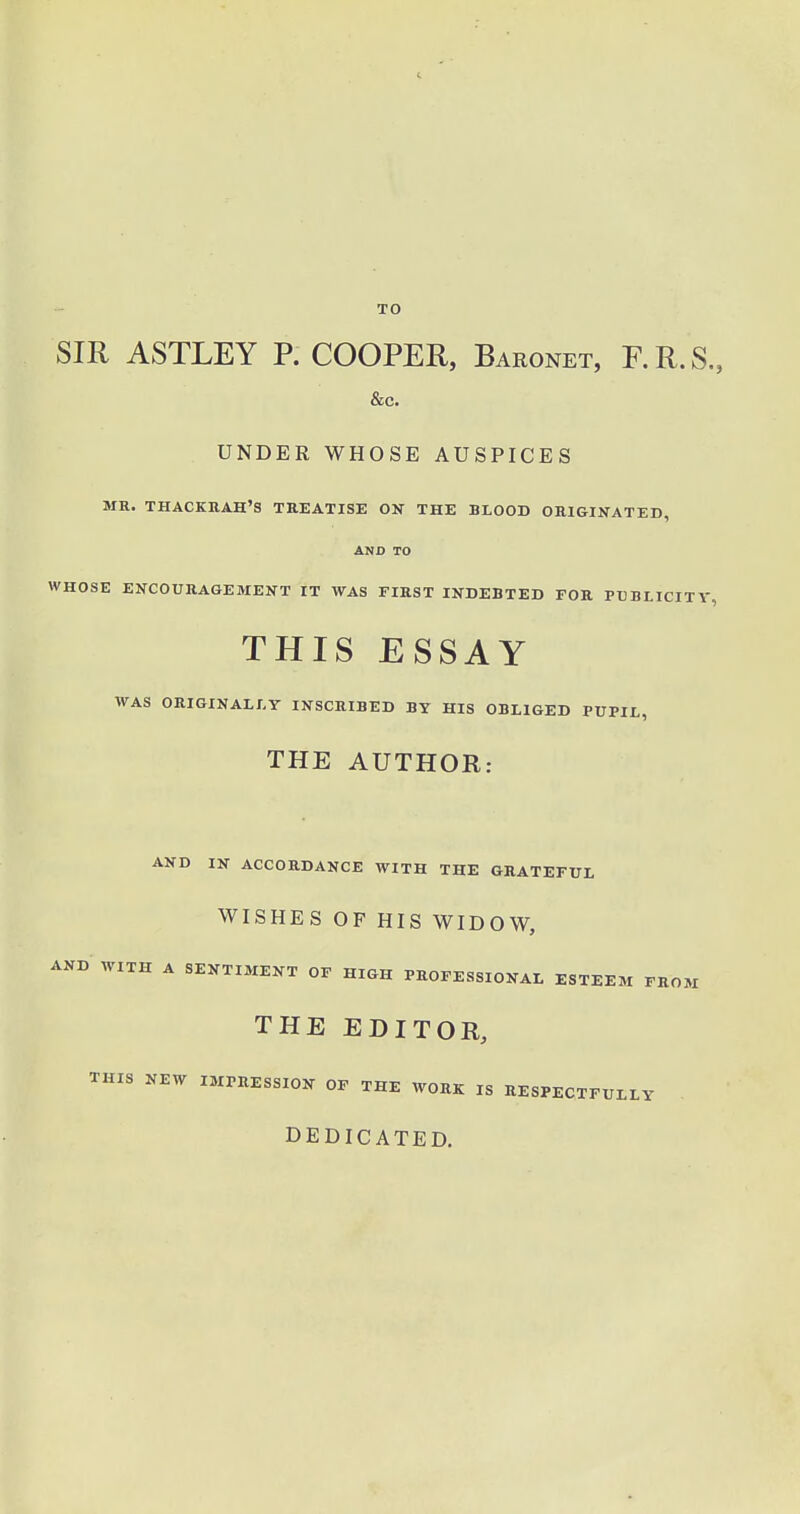 TO SIR ASTLEY P. COOPER, Baronet, F. R. S., &c. UNDER WHOSE AUSPICES MR. THACKRAH'S TREATISE ON THE BLOOD ORIGINATED, AND TO WHOSE ENCOURAGEMENT IT WAS FIRST INDEBTED FOR PUBLICITY, THIS ESSAY WAS ORIGINALLY INSCRIBED BY HIS OBLIGED PUPIL, THE AUTHOR: AND IN ACCORDANCE WITH THE GRATEFUL WISHES OP HIS WIDOW, AND WITH A SENTIMENT OF HIGH PROFESSIONAL ESTEEM FROM THE EDITOR, THIS NEW IMPRESSION OF THE WORK IS RESPECTFULLY DEDICATED.